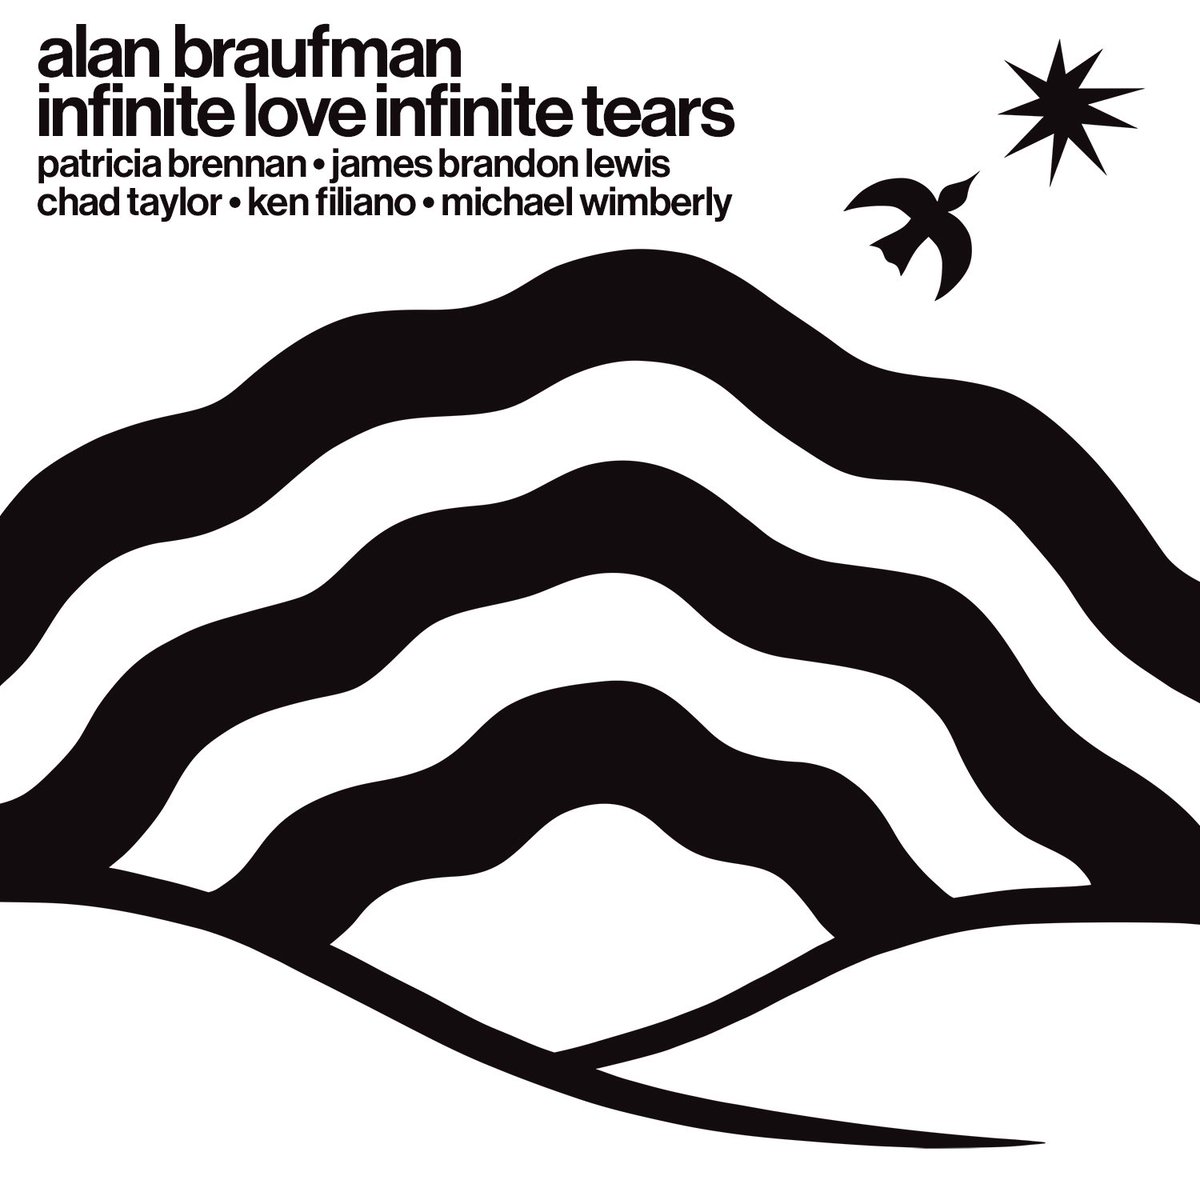 Our exclusive mix today comes from @AlanBraufman whose new album Infinite Love, Infinite Tears is out in two weeks on @Valleyofsearch - tune into @sohoradio from 9am